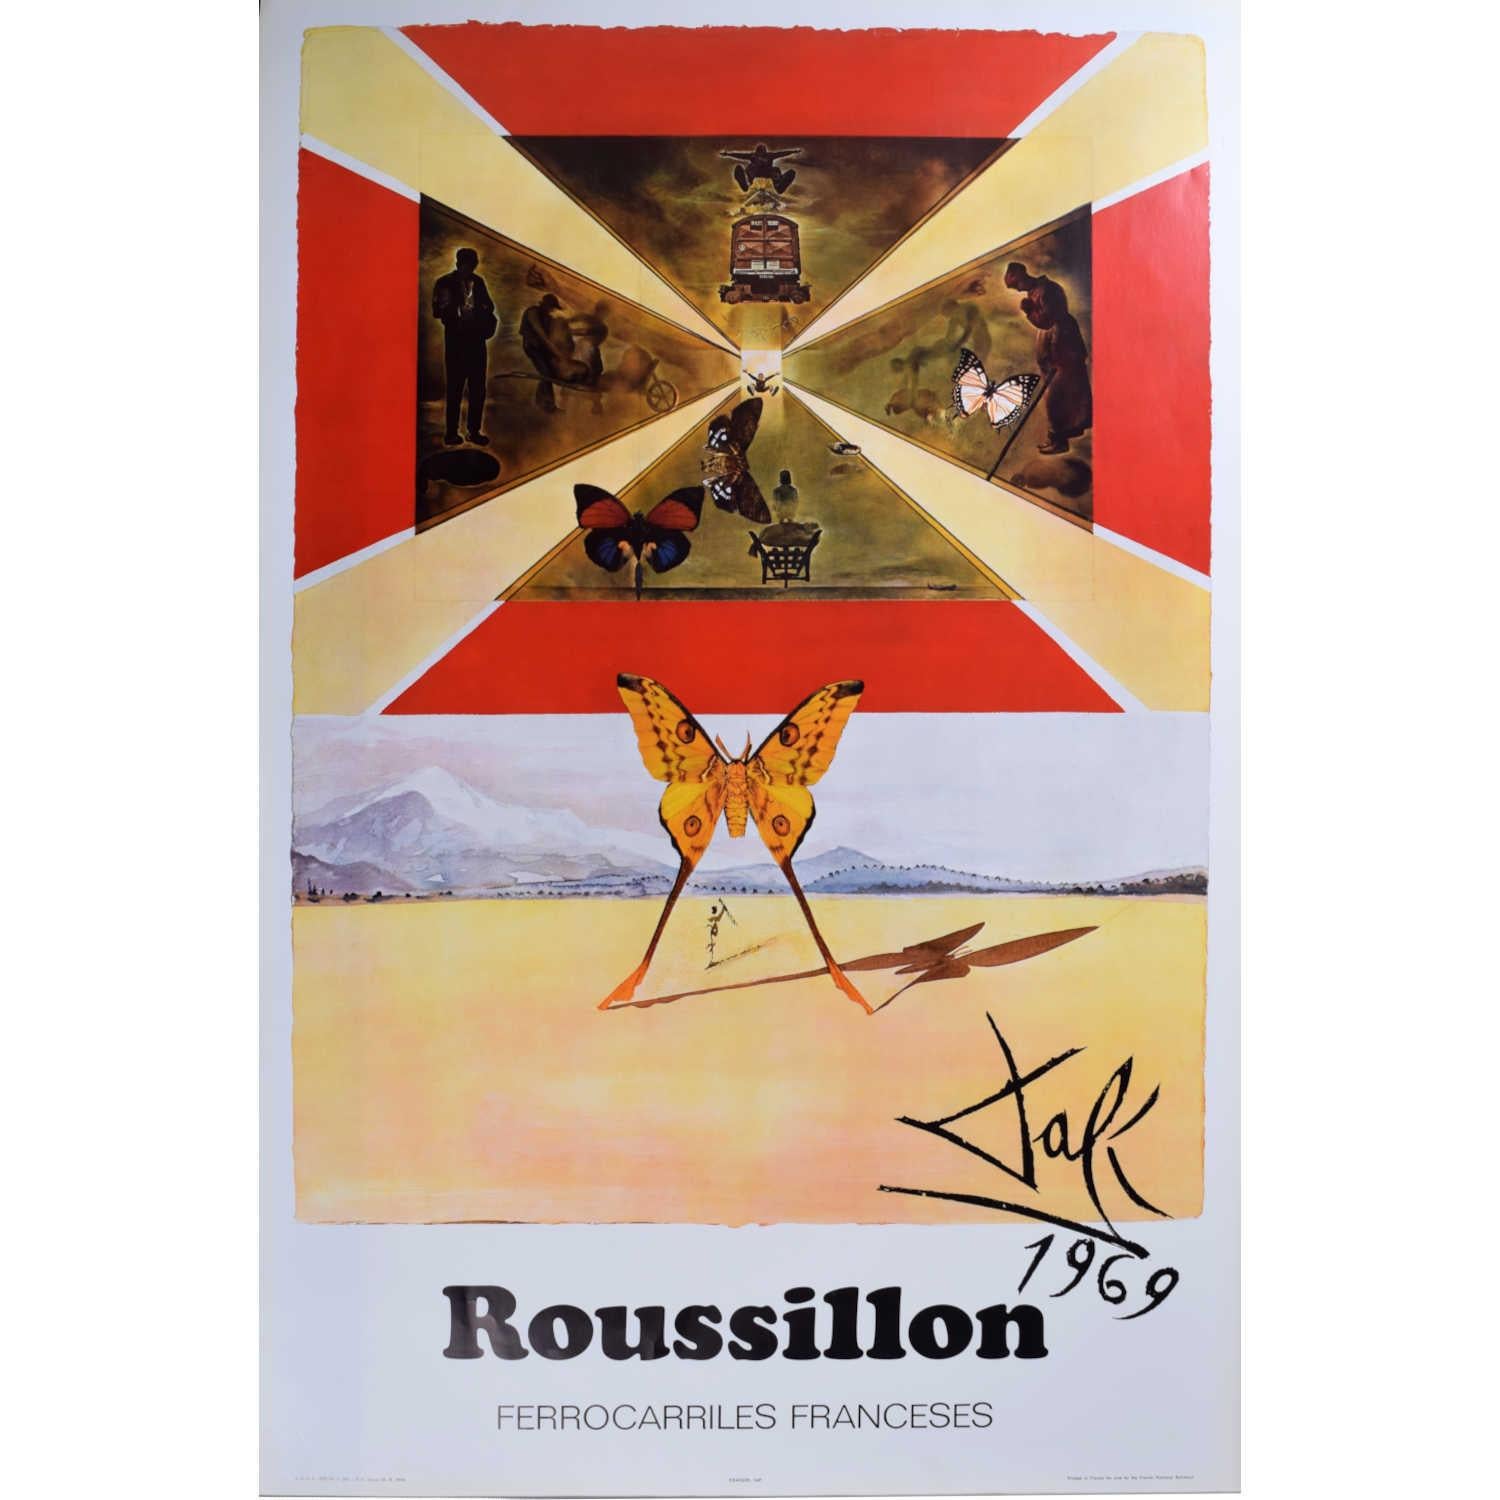 Salvador Dali Roussillon French National Railways SNCF Poster (1969) Surrealist - Print by (after) Salvador Dali